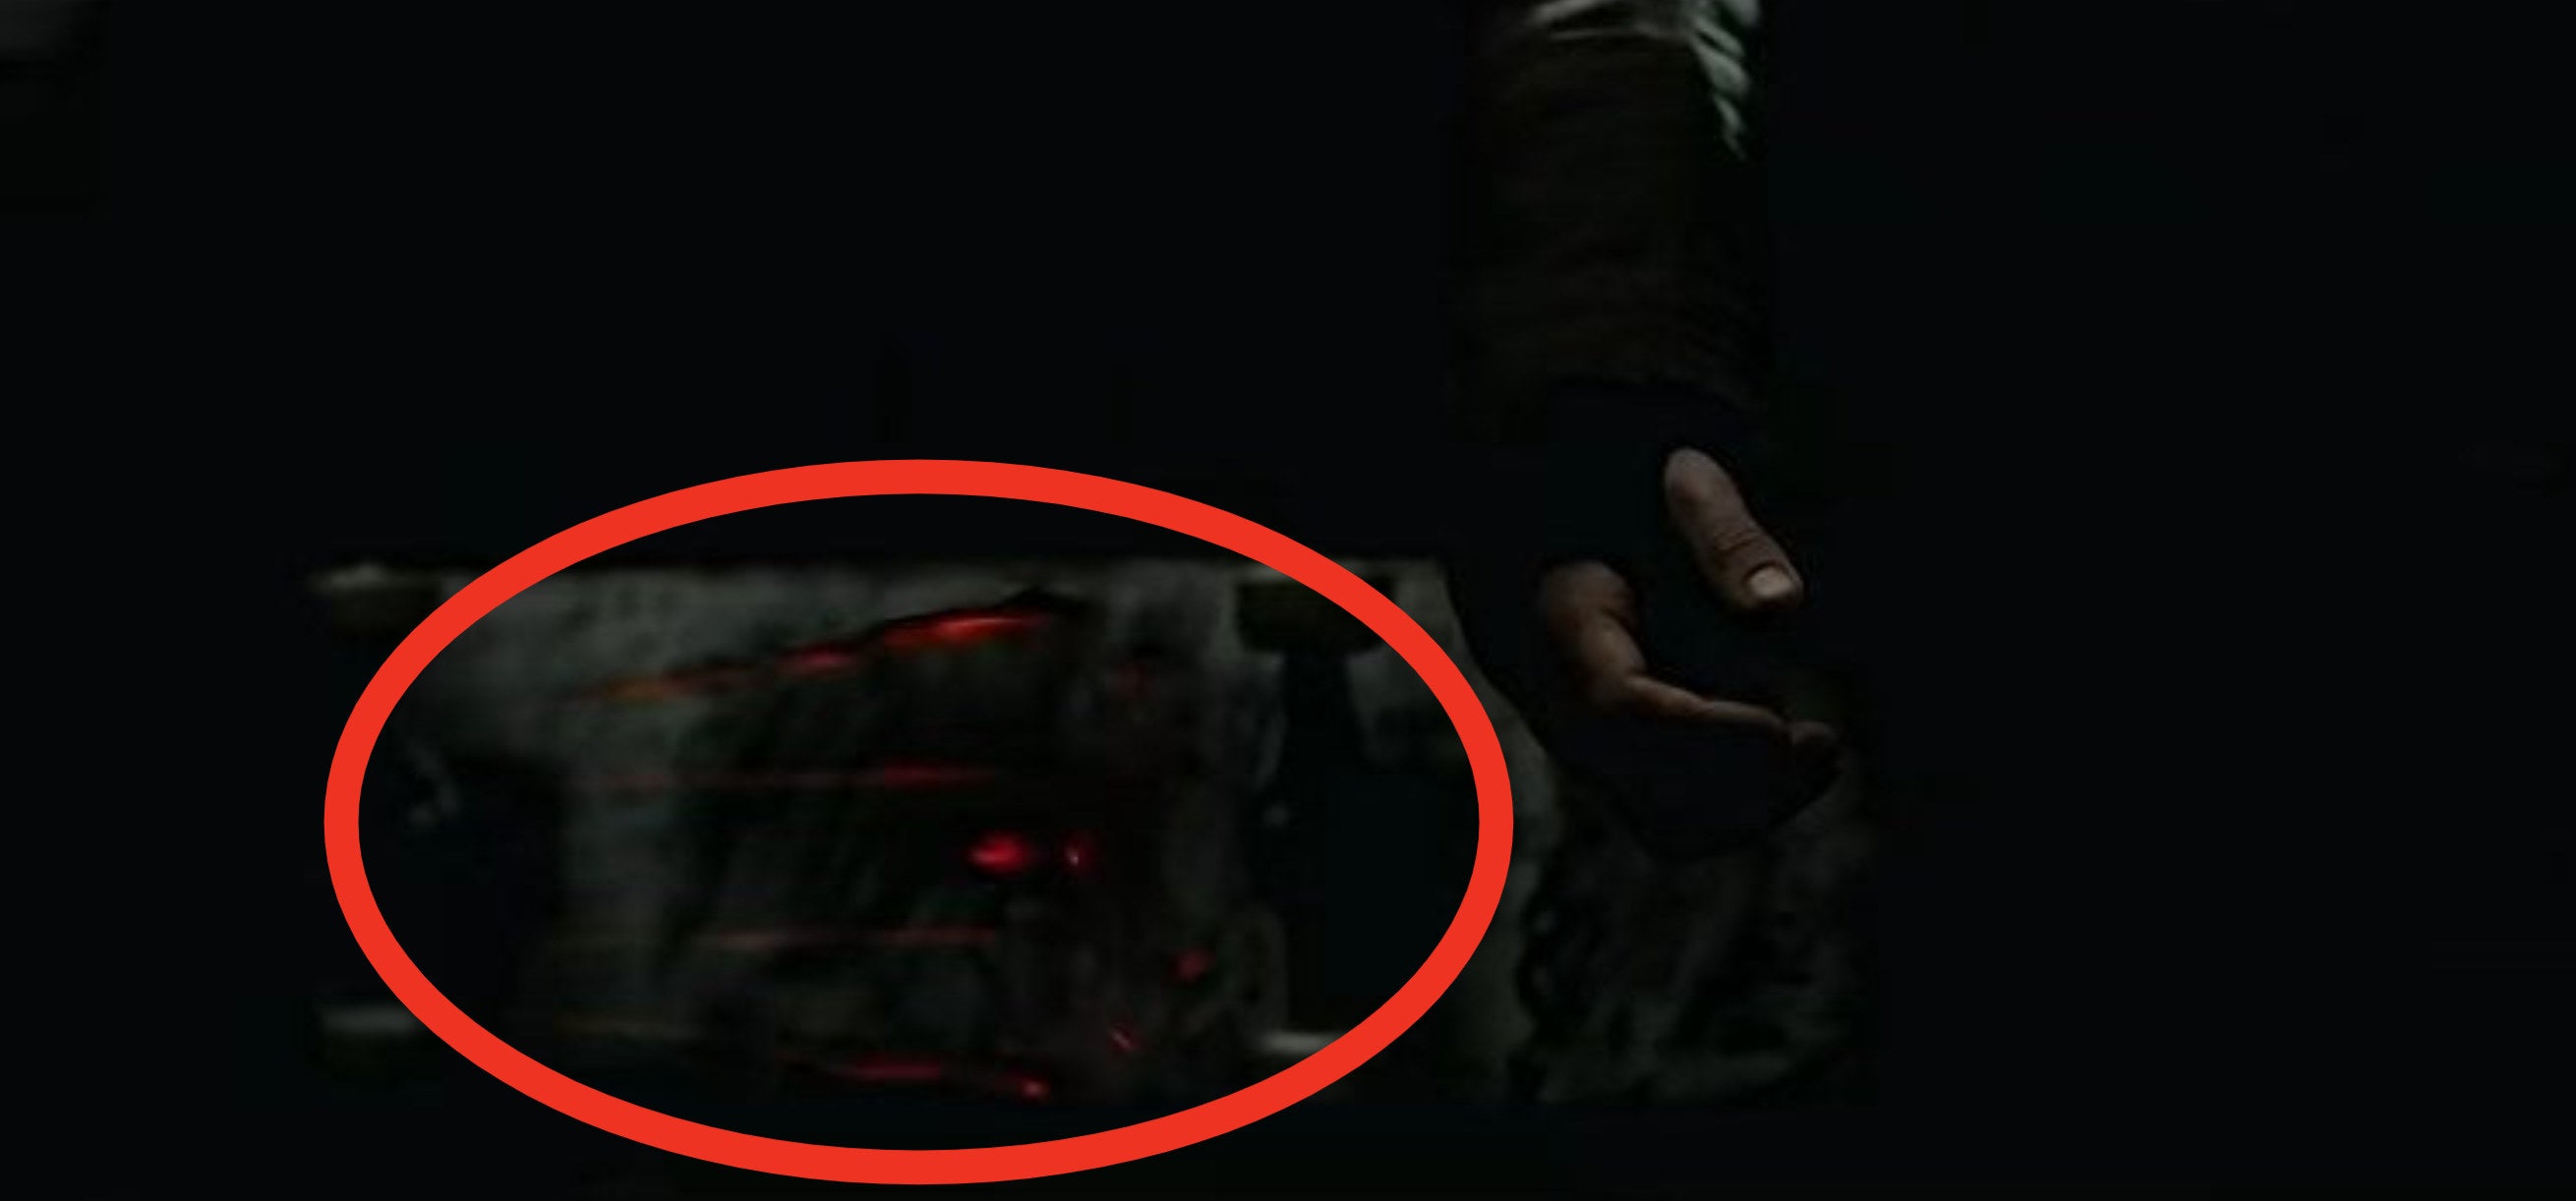 Peter&#x27;s Spider-Man symbol flashing over his skateboard on the train in &quot;The Amazing Spider-Man&quot;